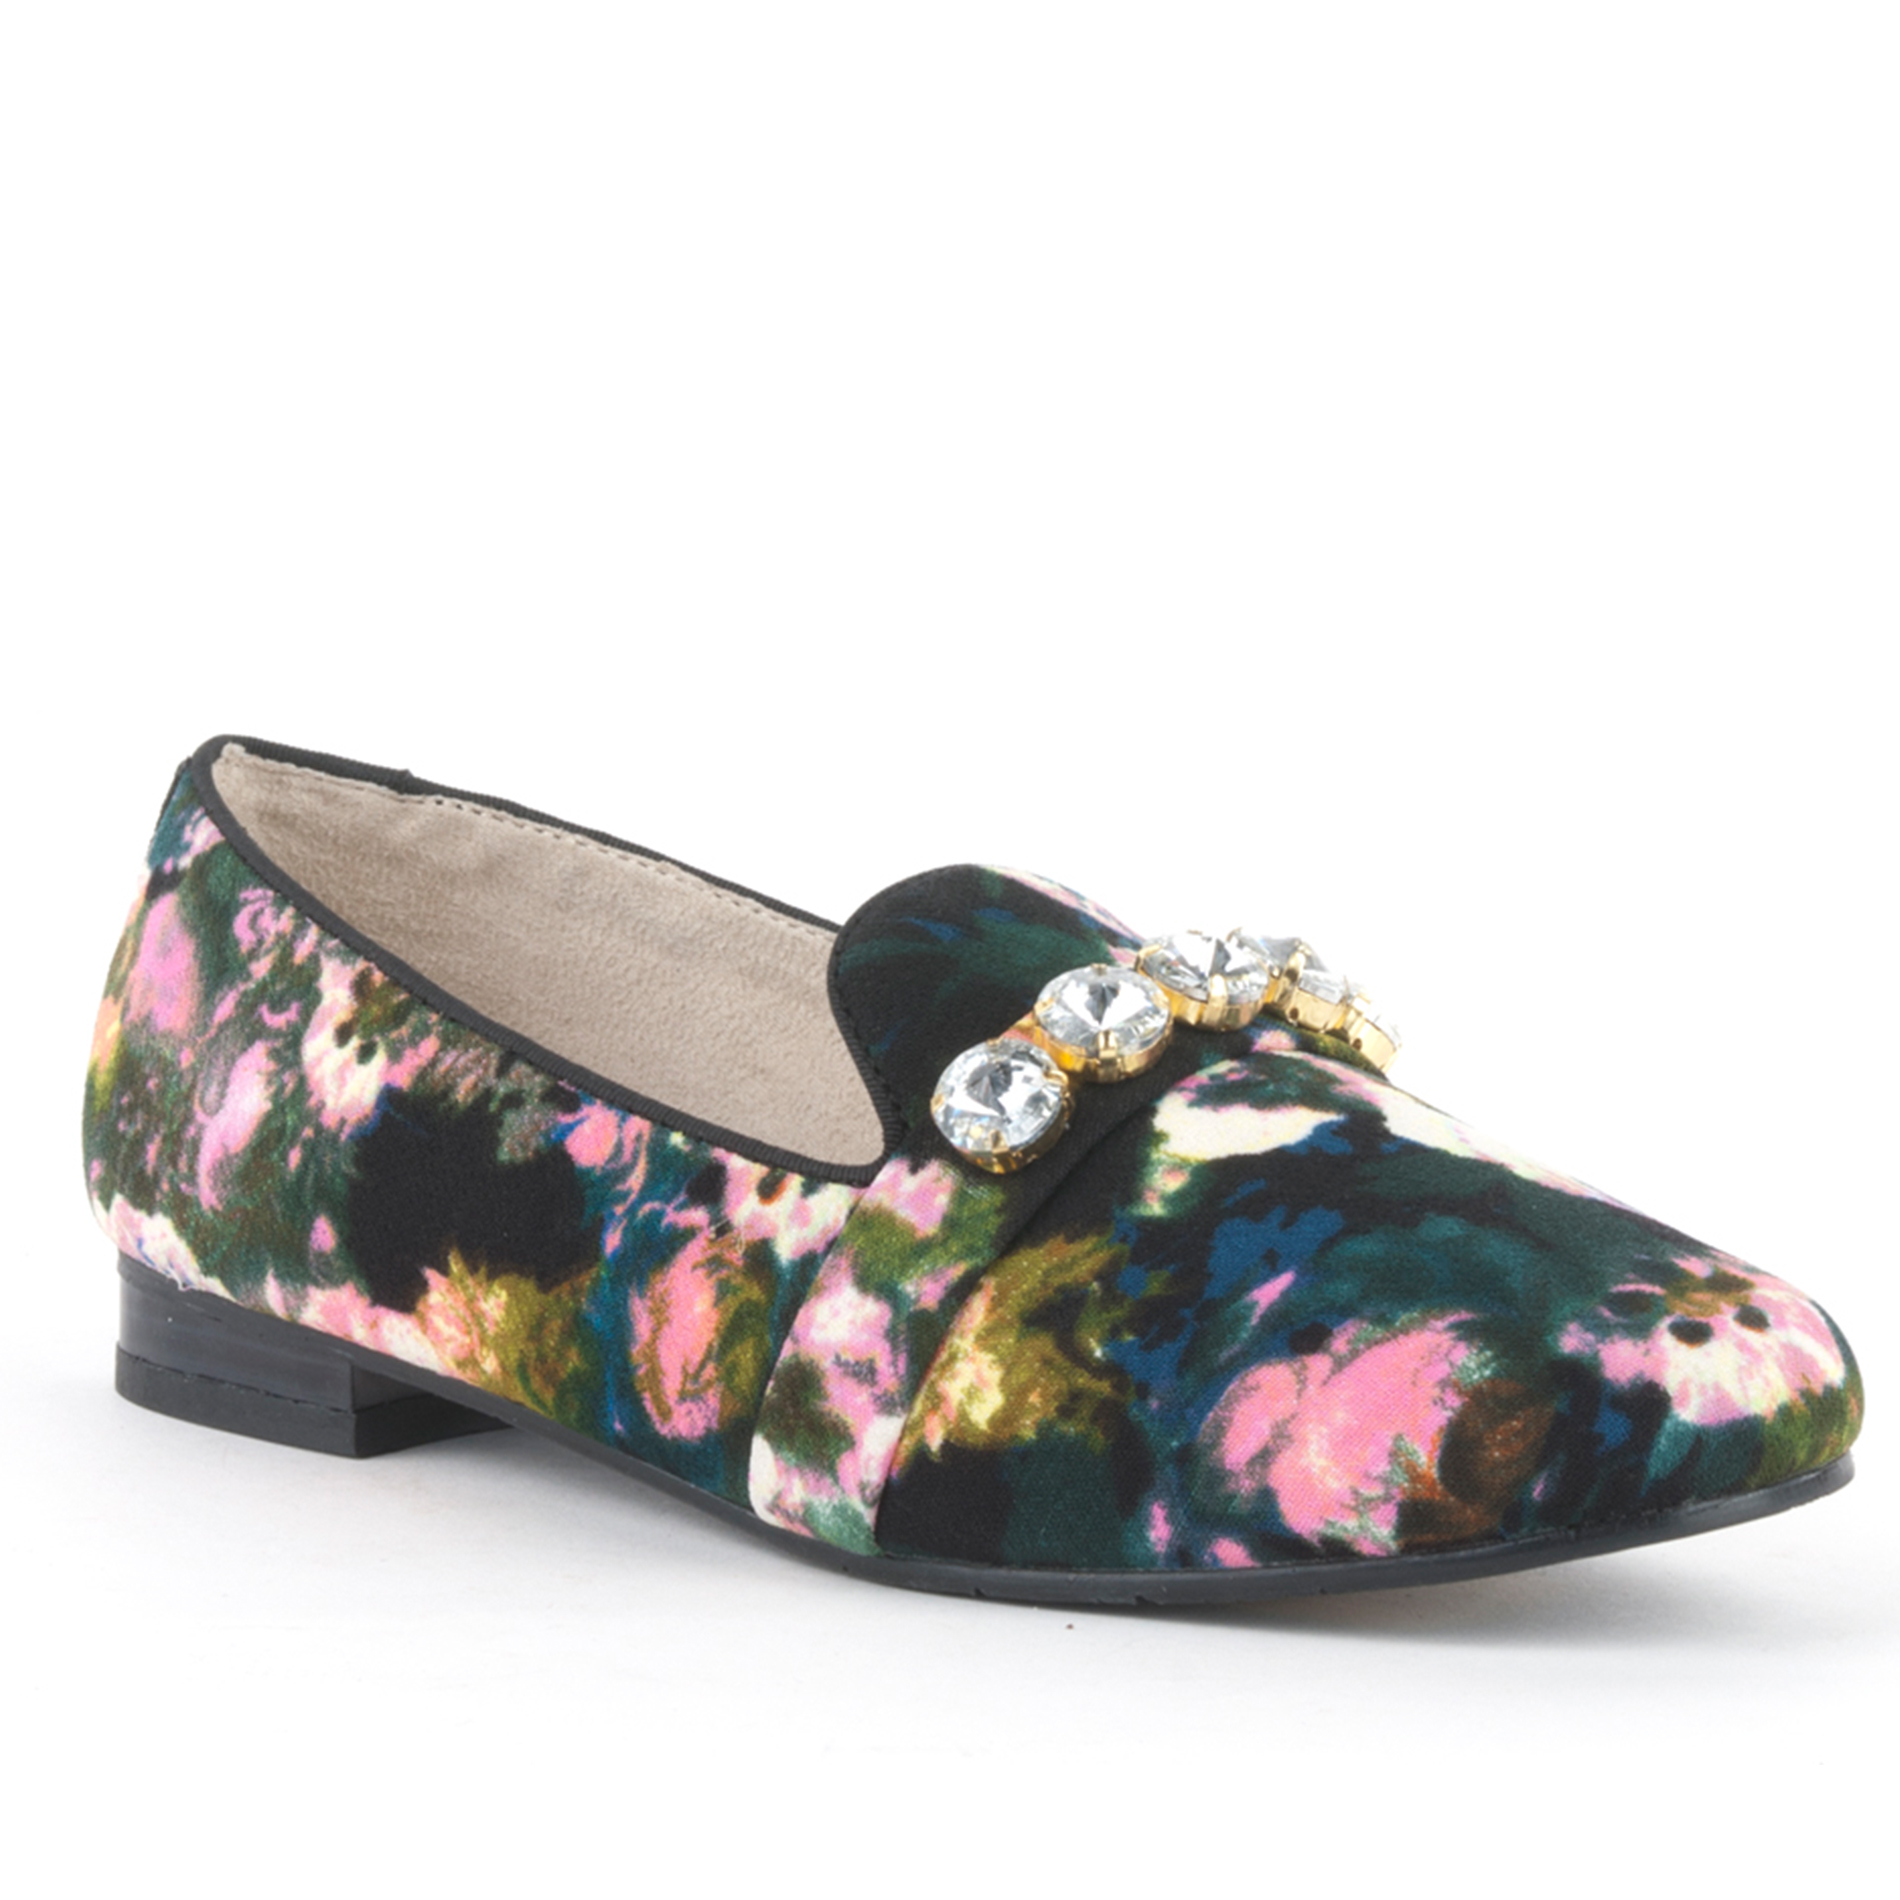 BC Footwear Women's Jumpin' Around Multicolor/Floral Casual Loafer